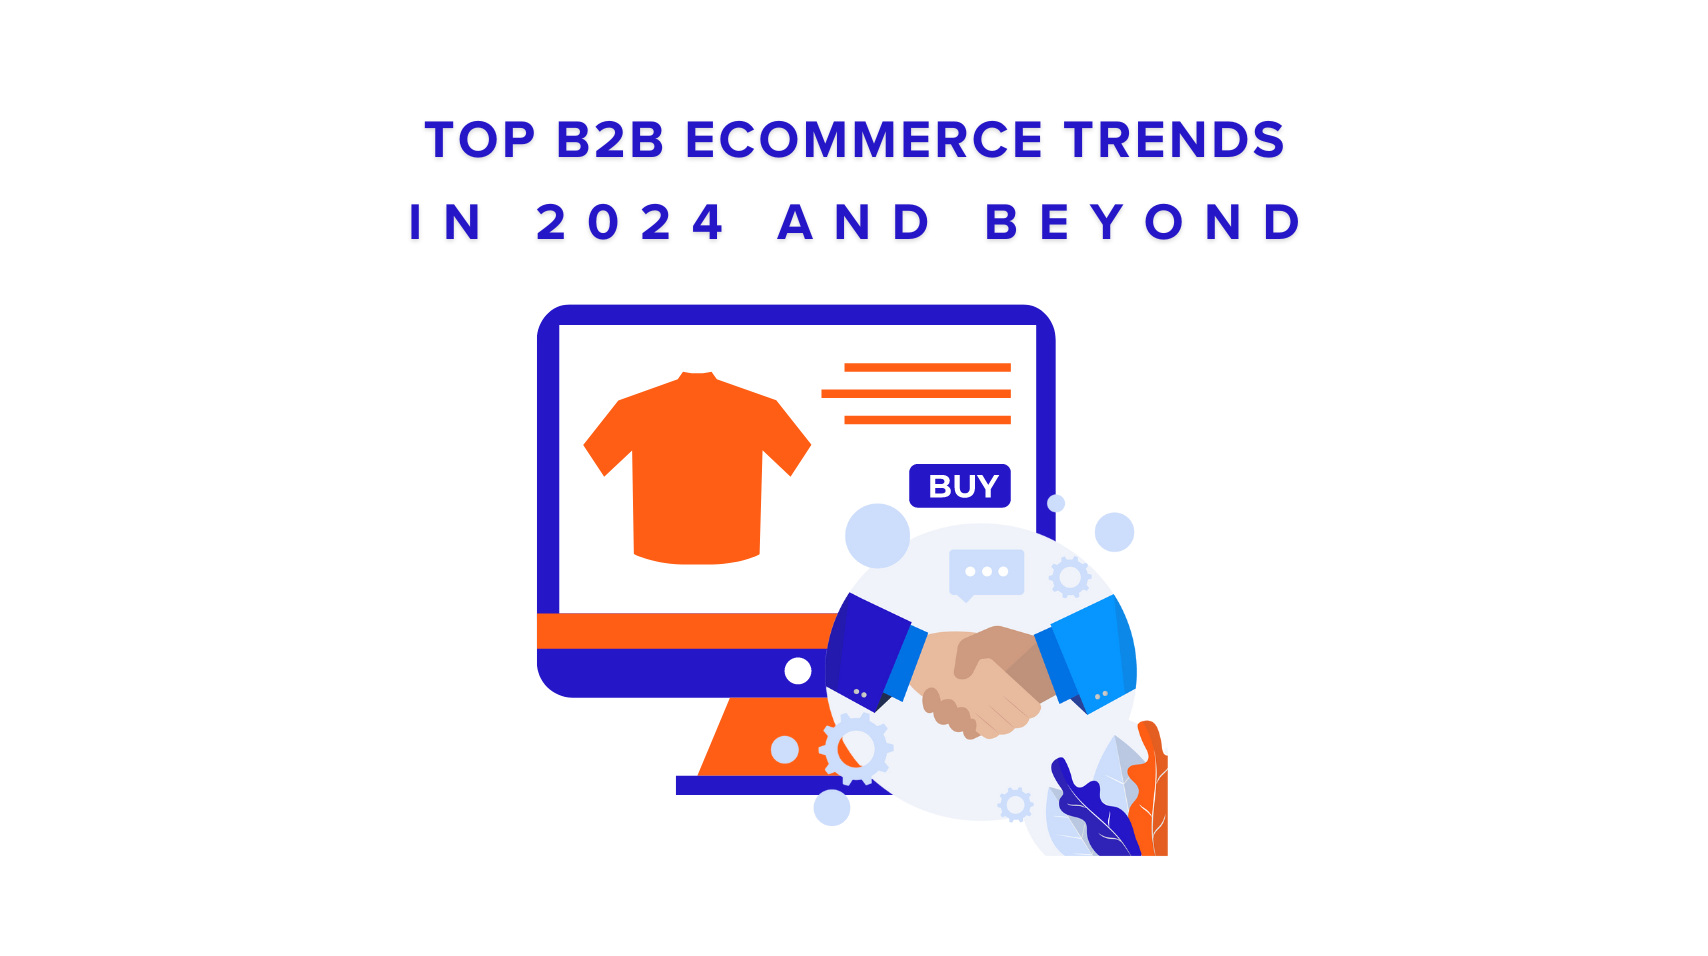 THE NEXT WAVE: B2B ECOMMERCE TRENDS BEYOND 2024